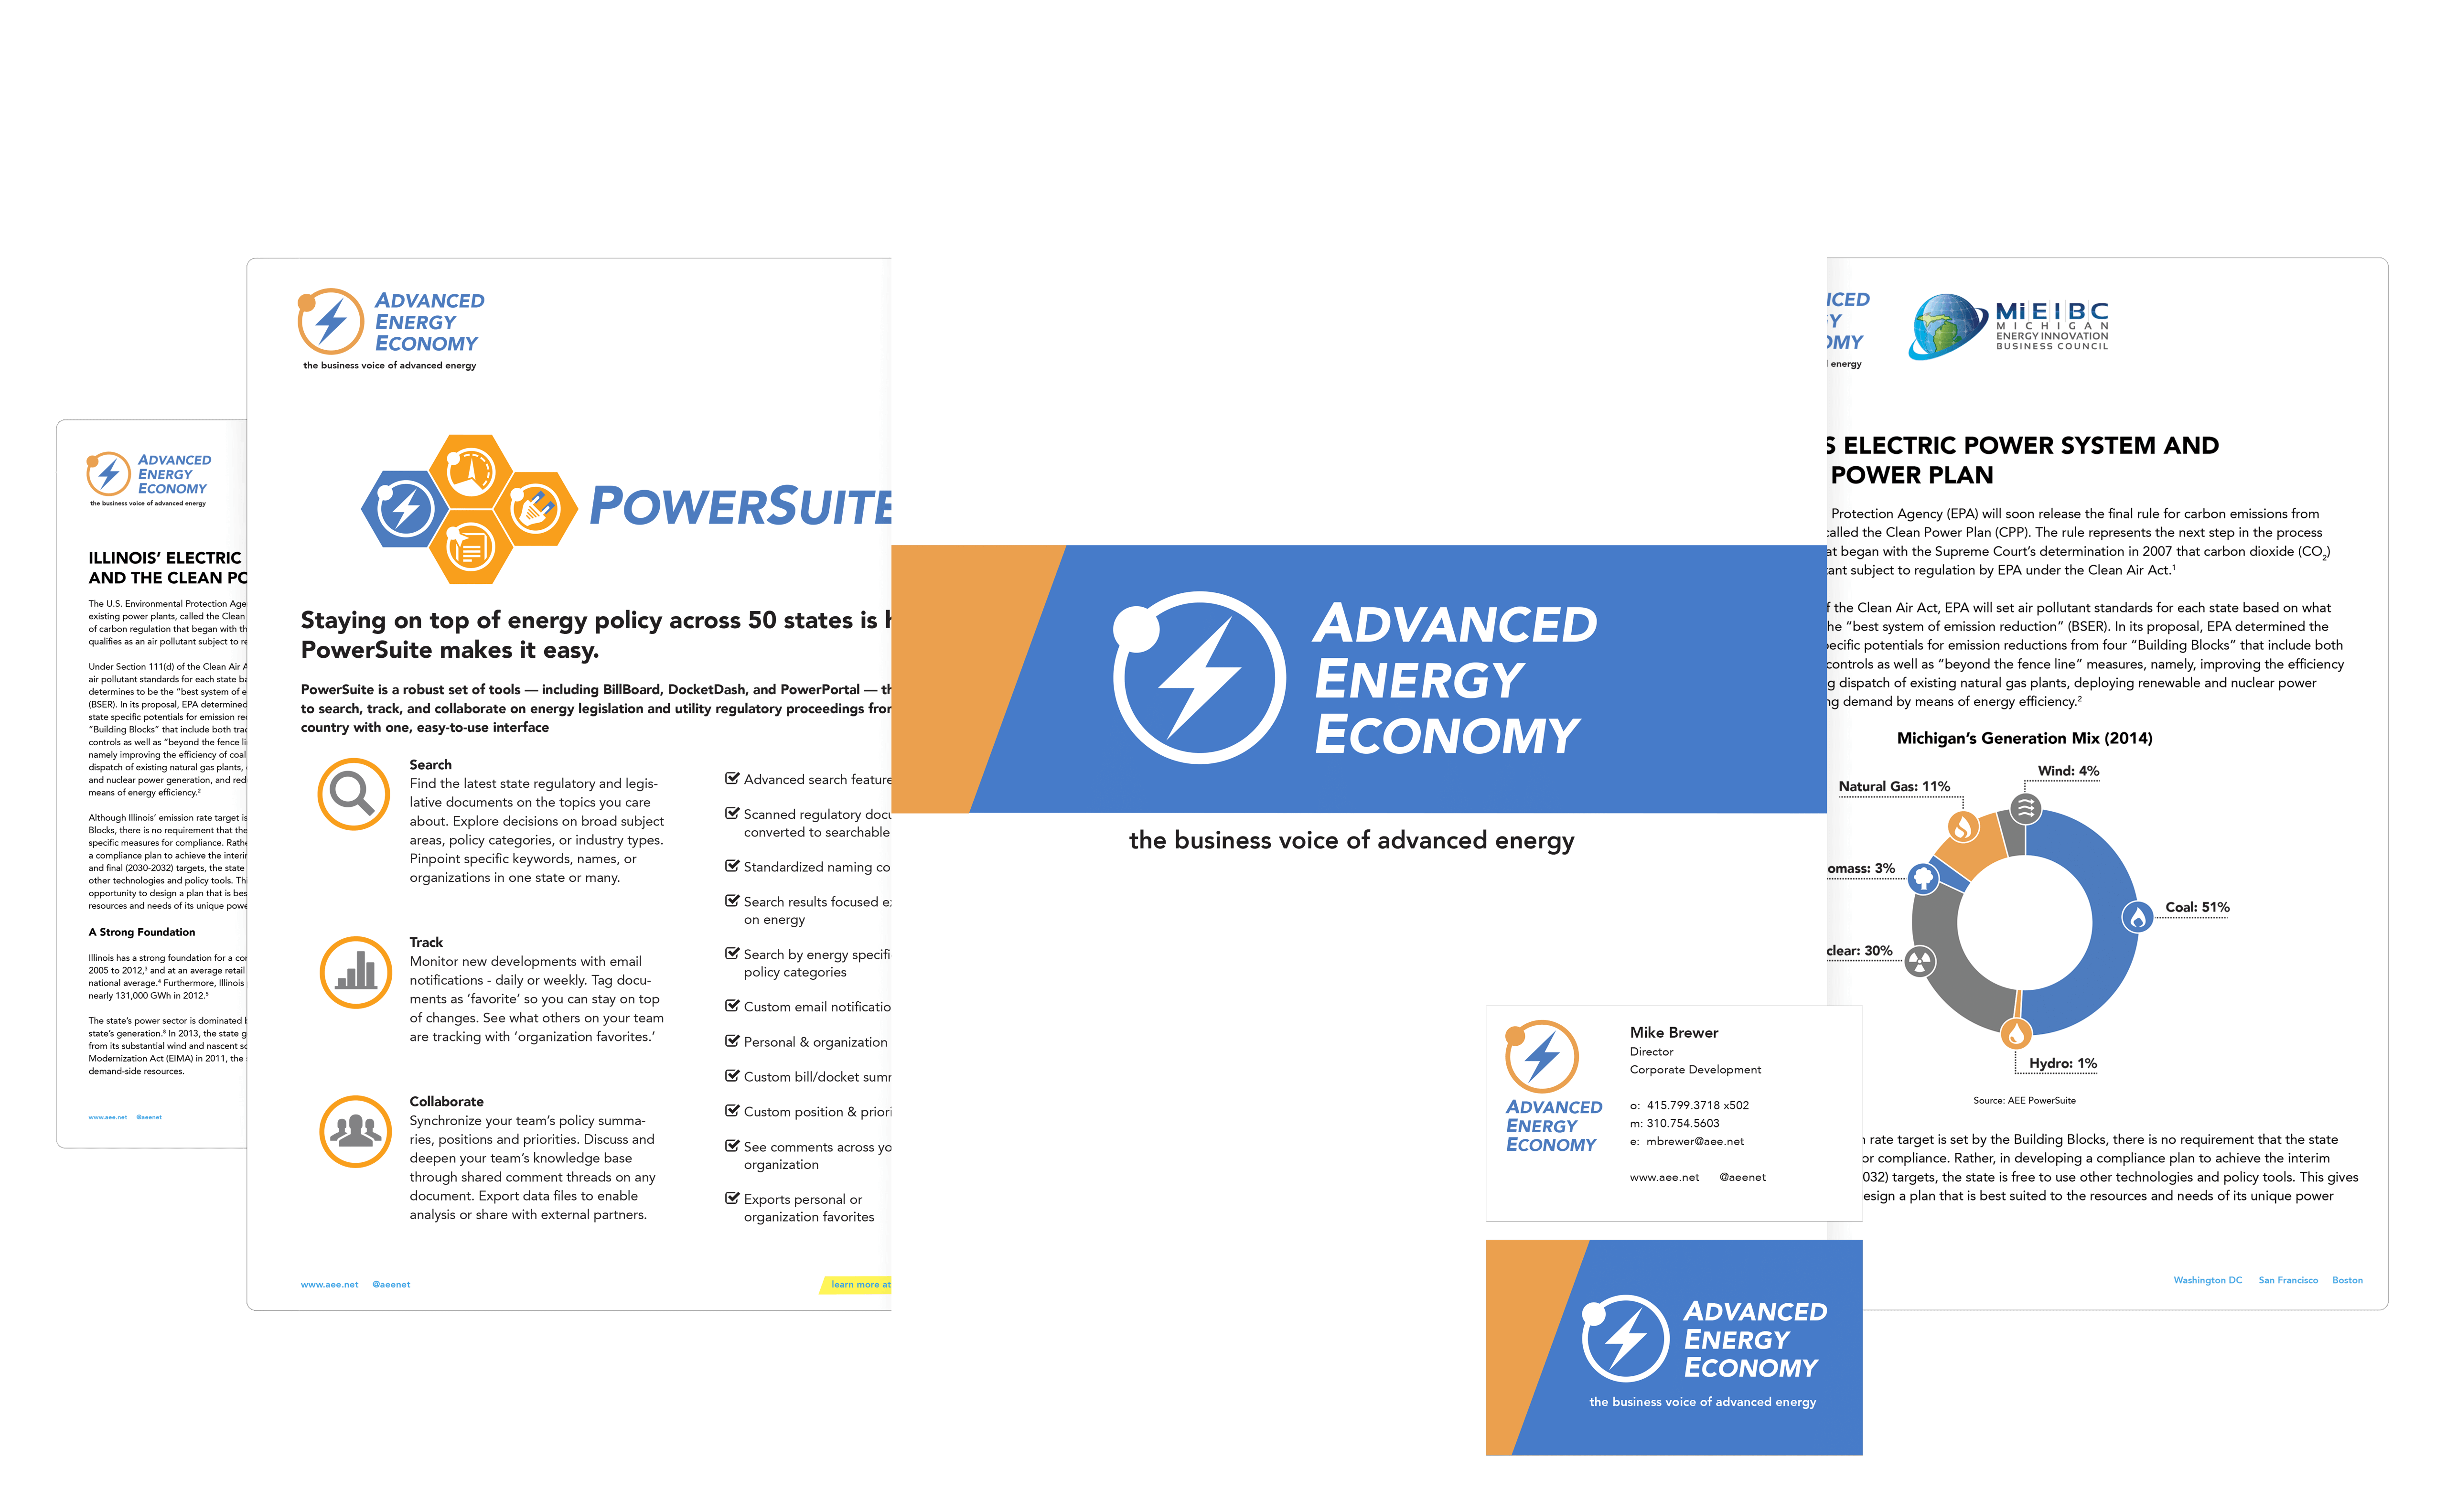 Advanced Energy Economy Brand and Style Guide